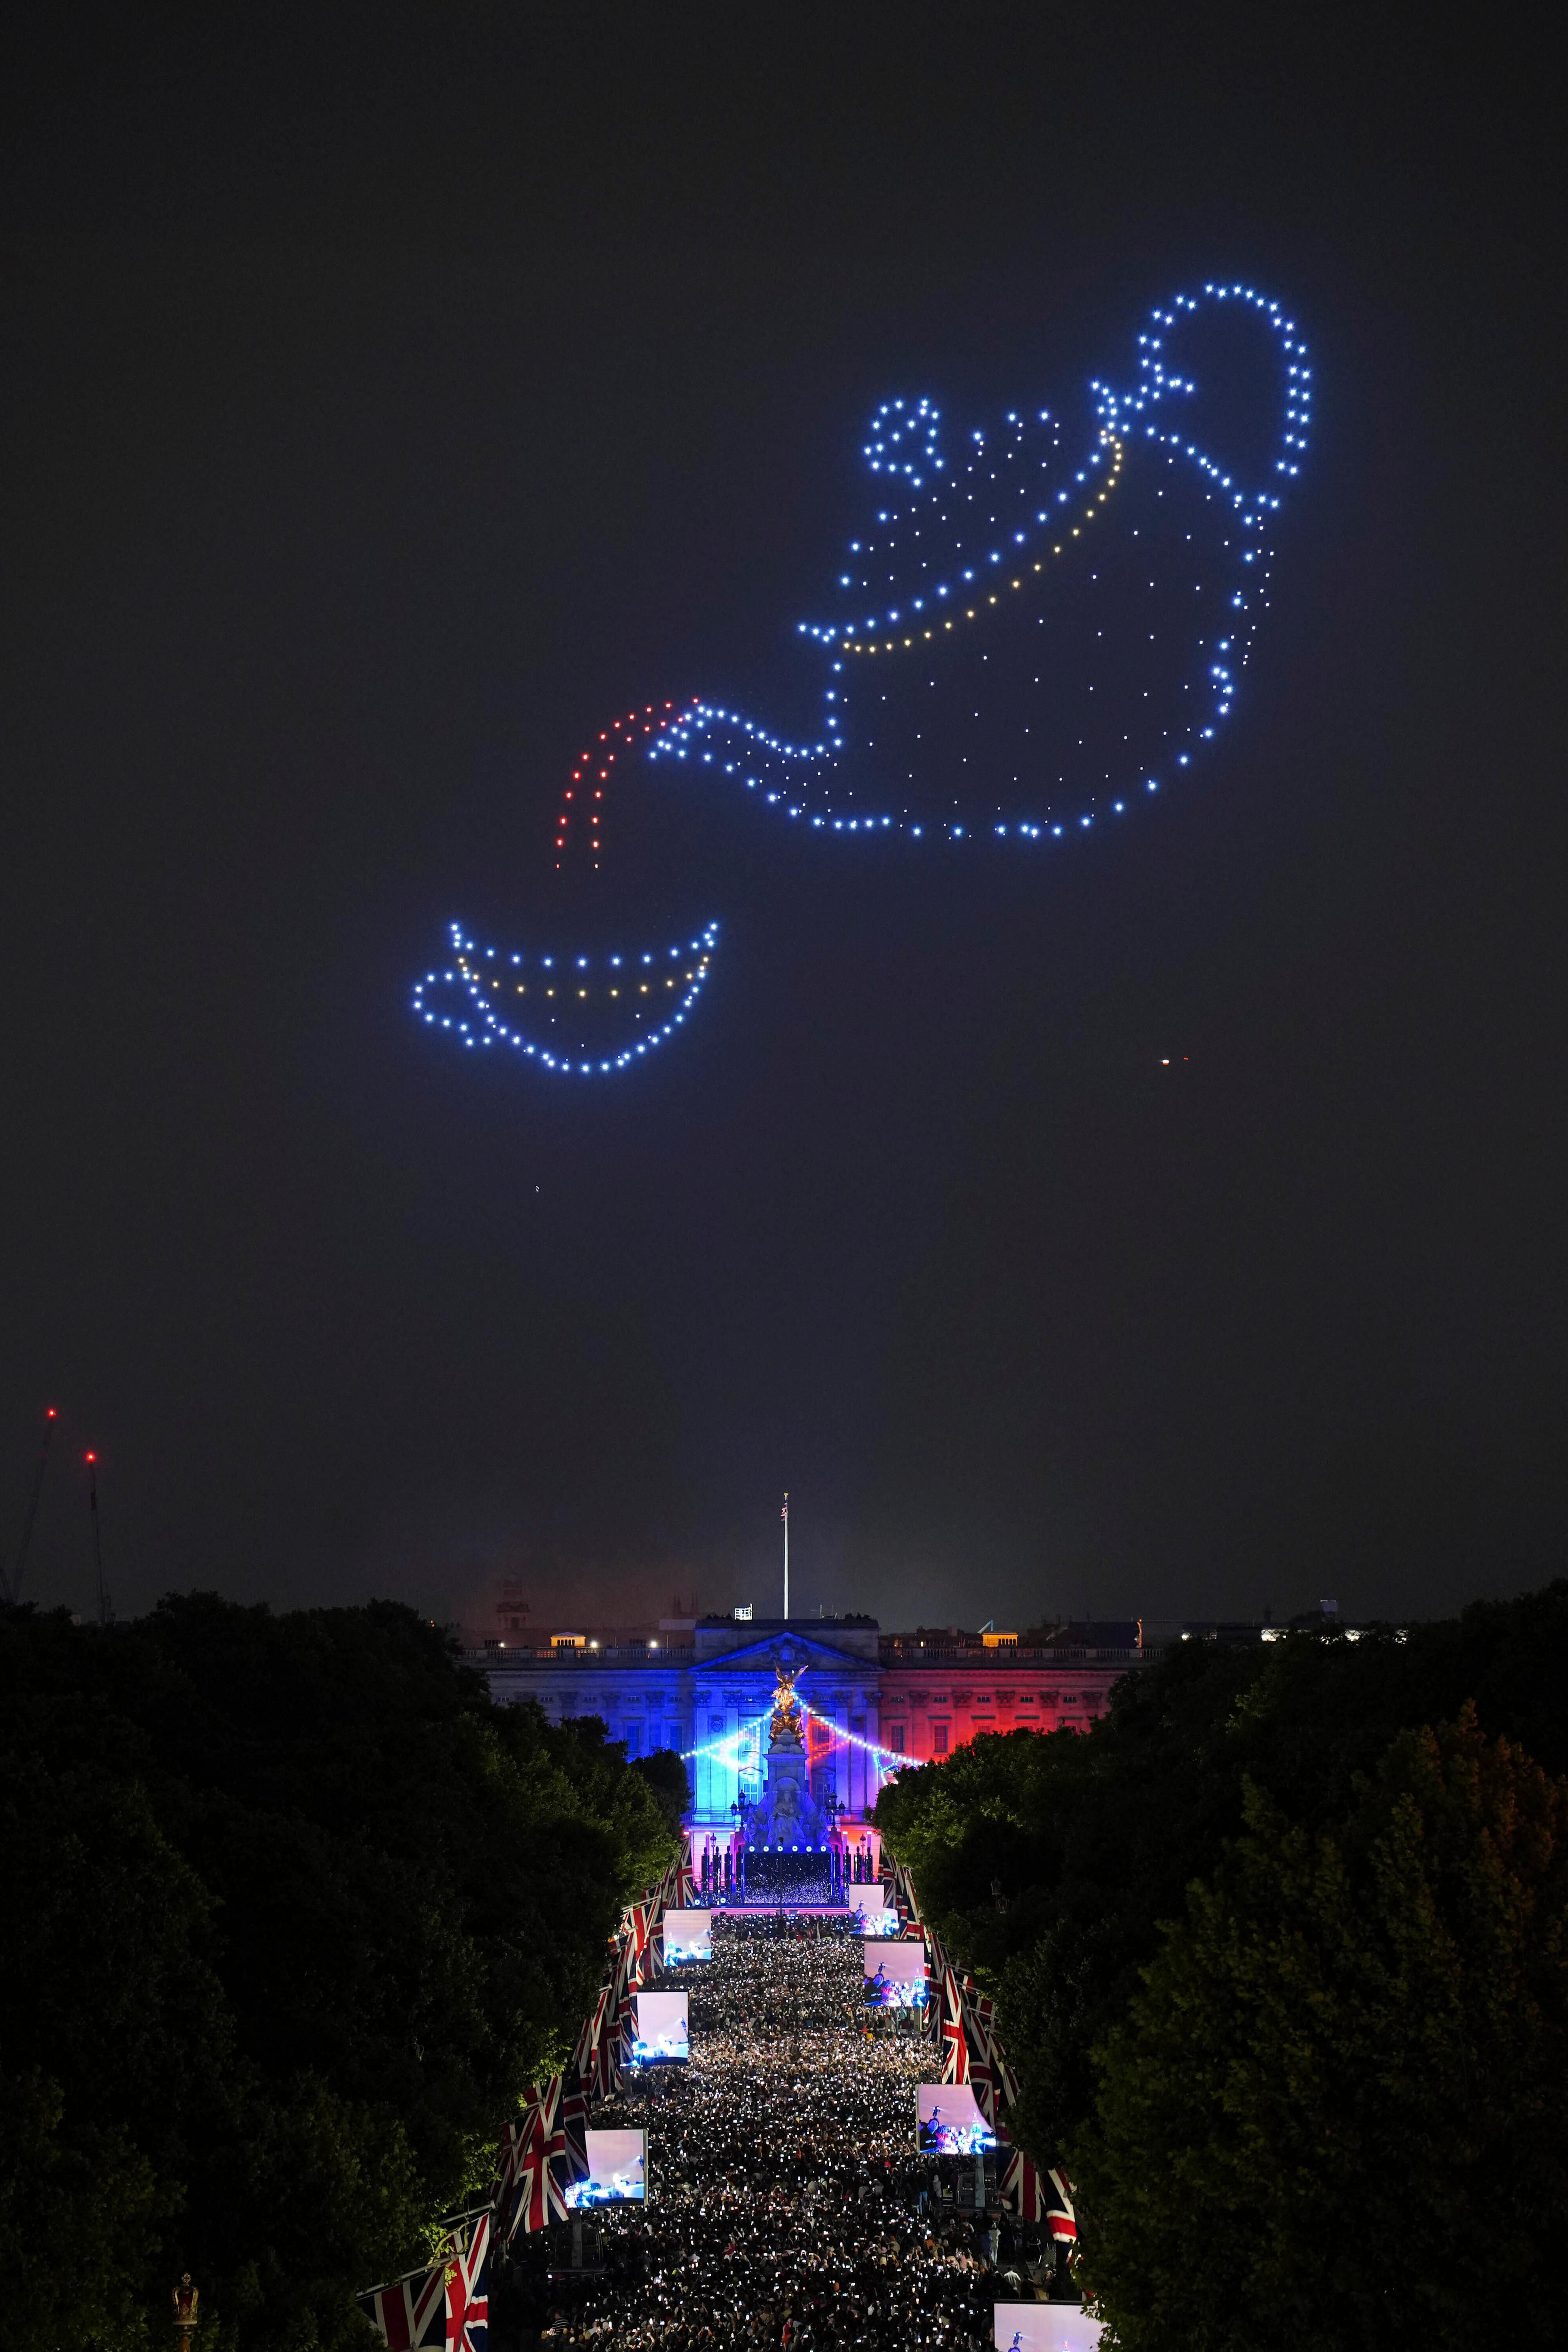 Drones with blue and red lights form the shape of a teapot and teacup above Buckingham Palace